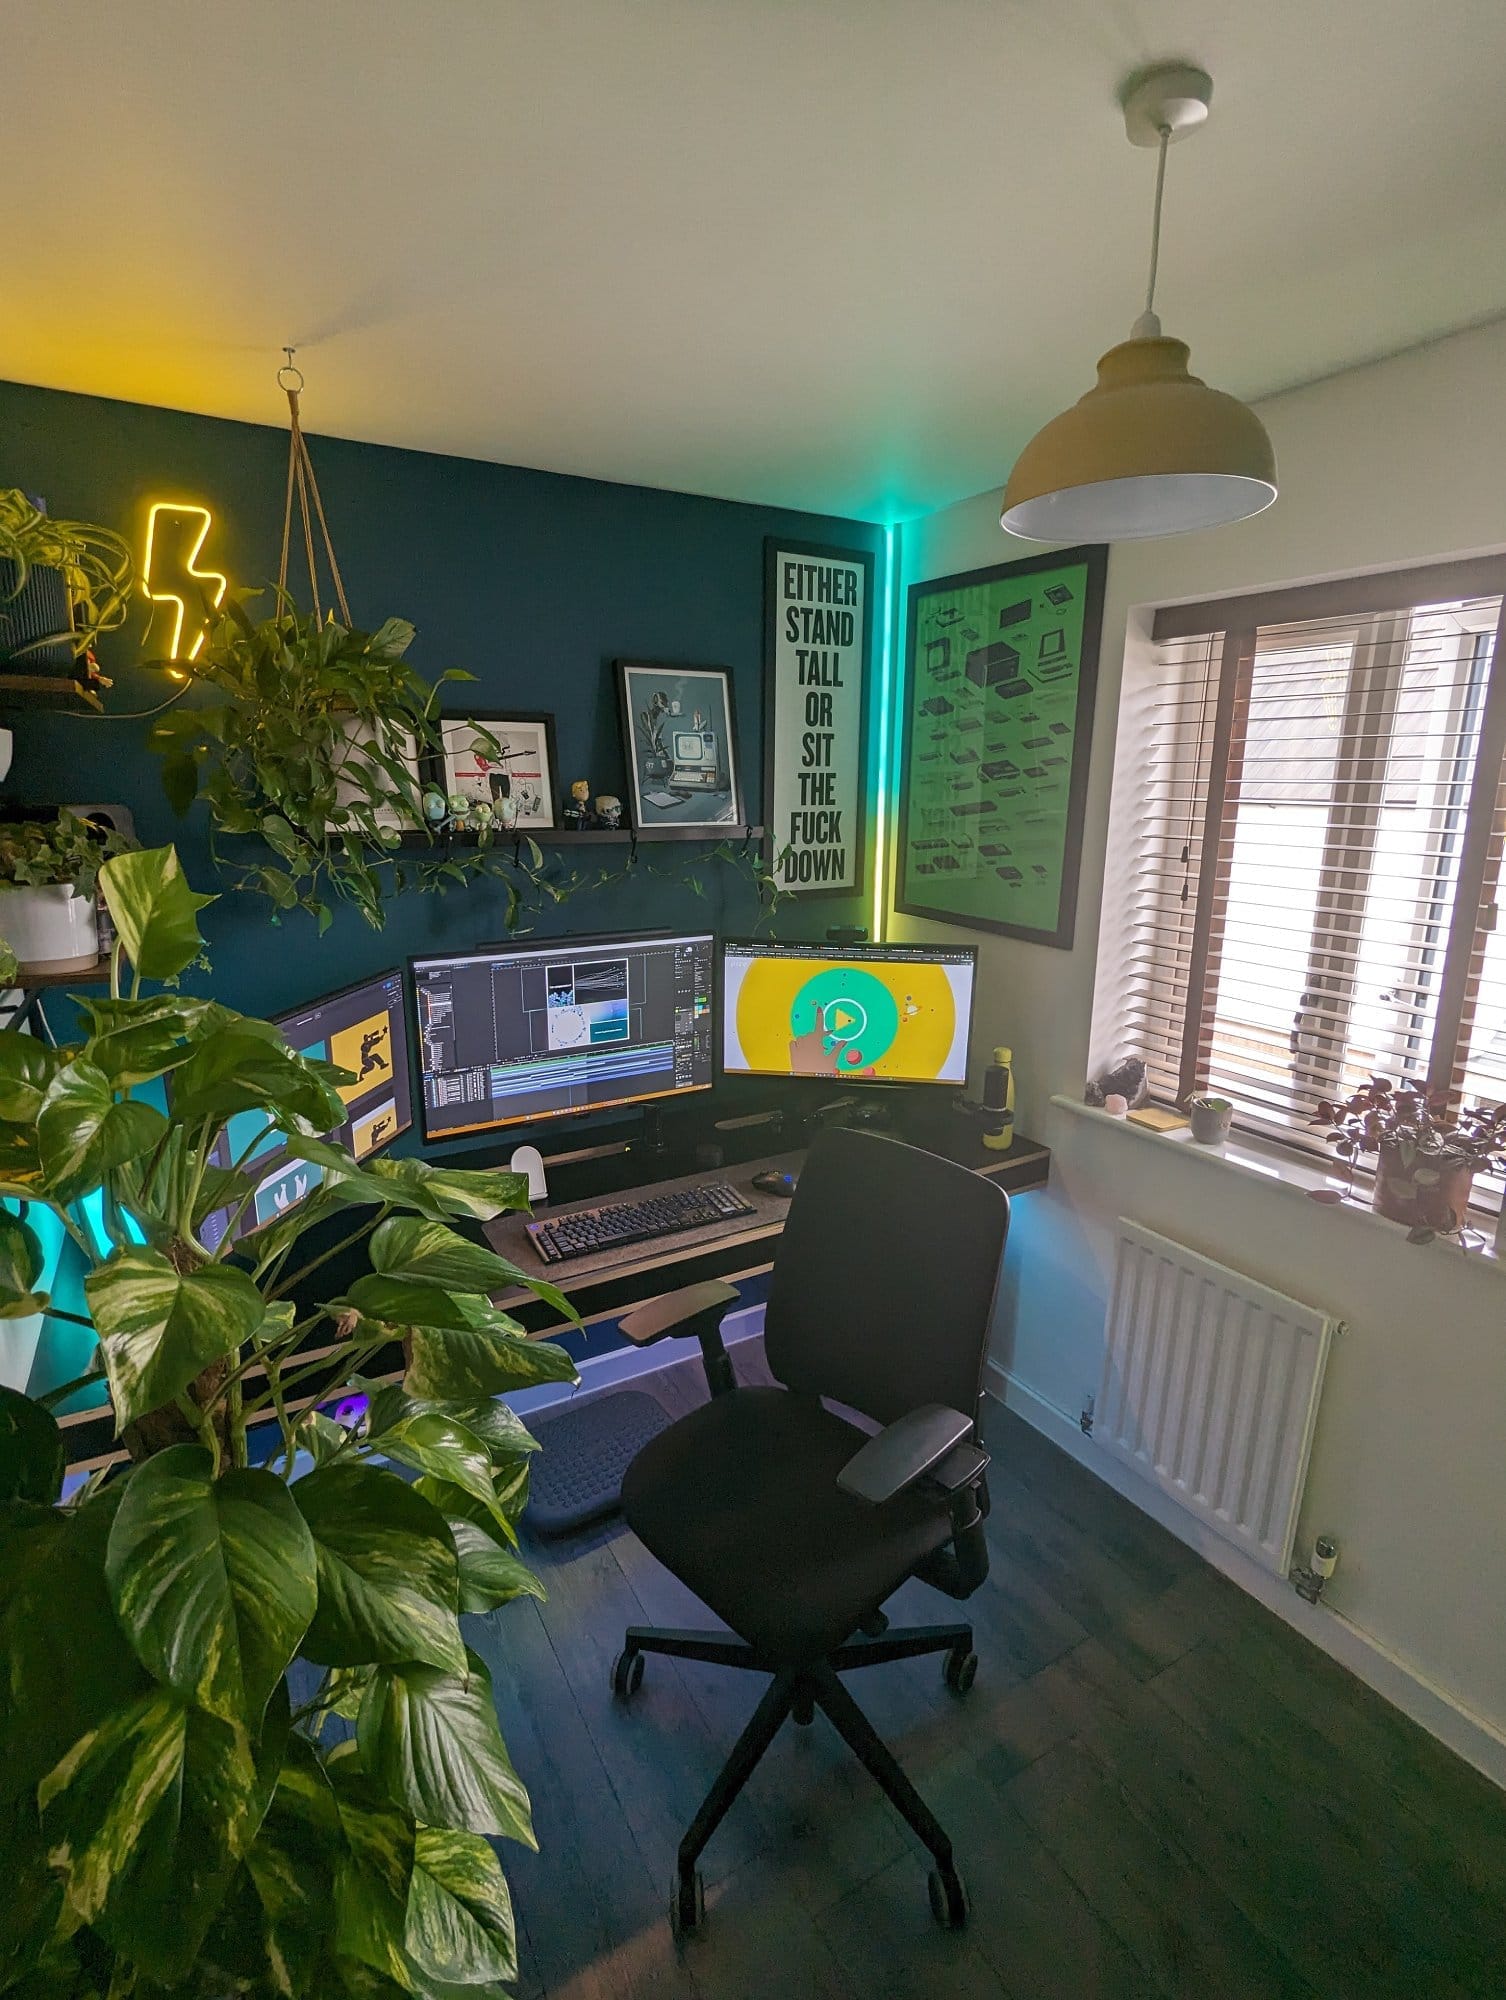 A well-organised multi-monitor desk setup in a home office with an accent deep navy wall